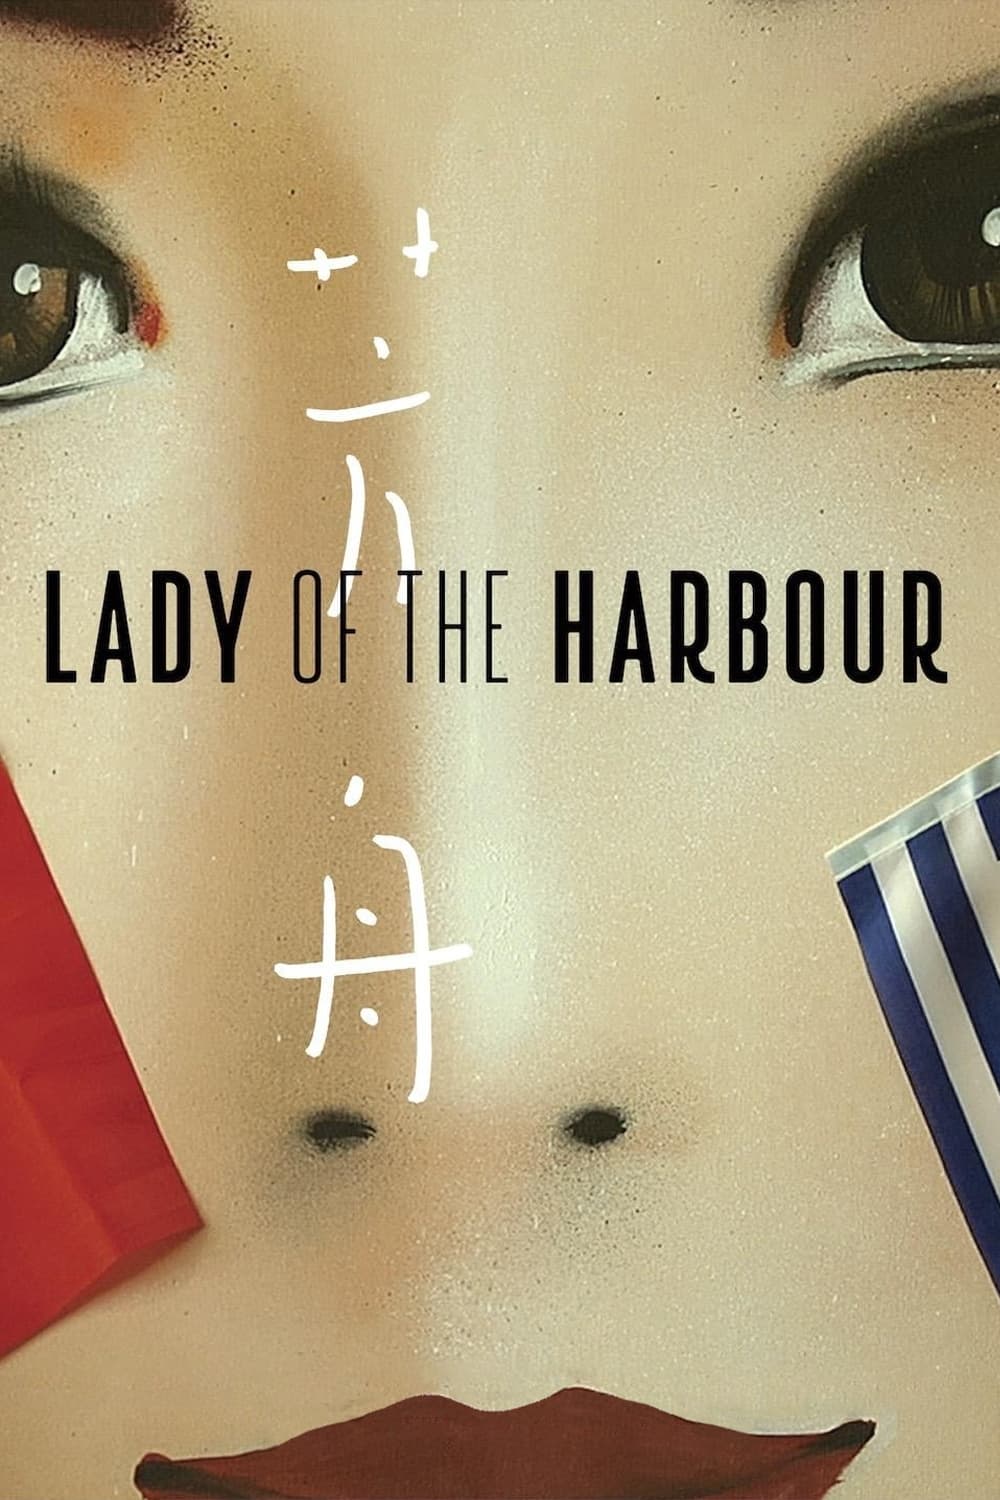 Lady of the Harbour